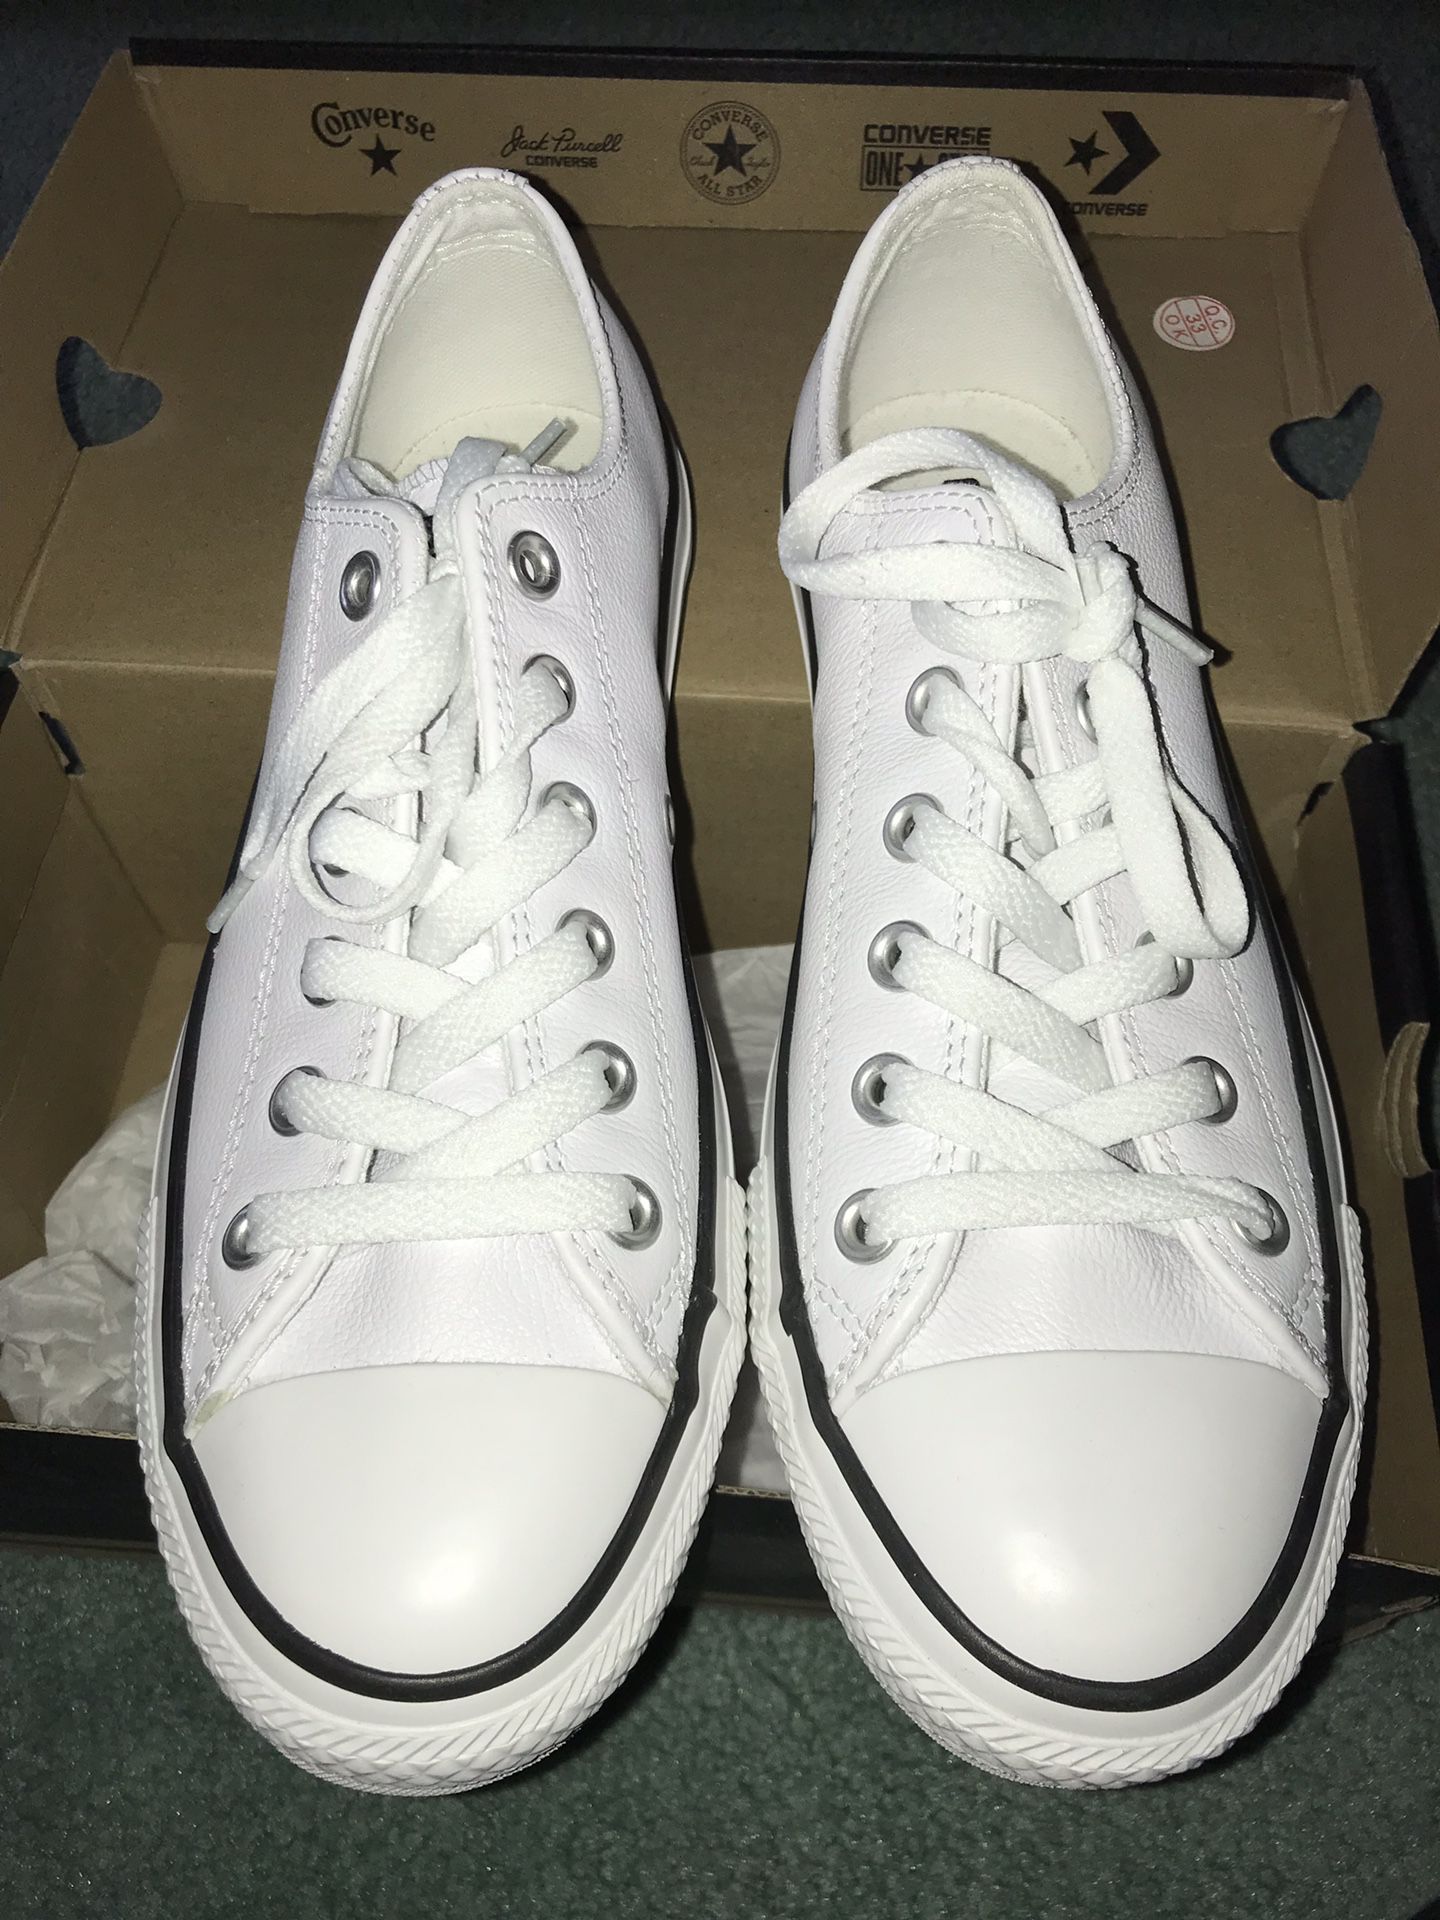 Low top all white Converse